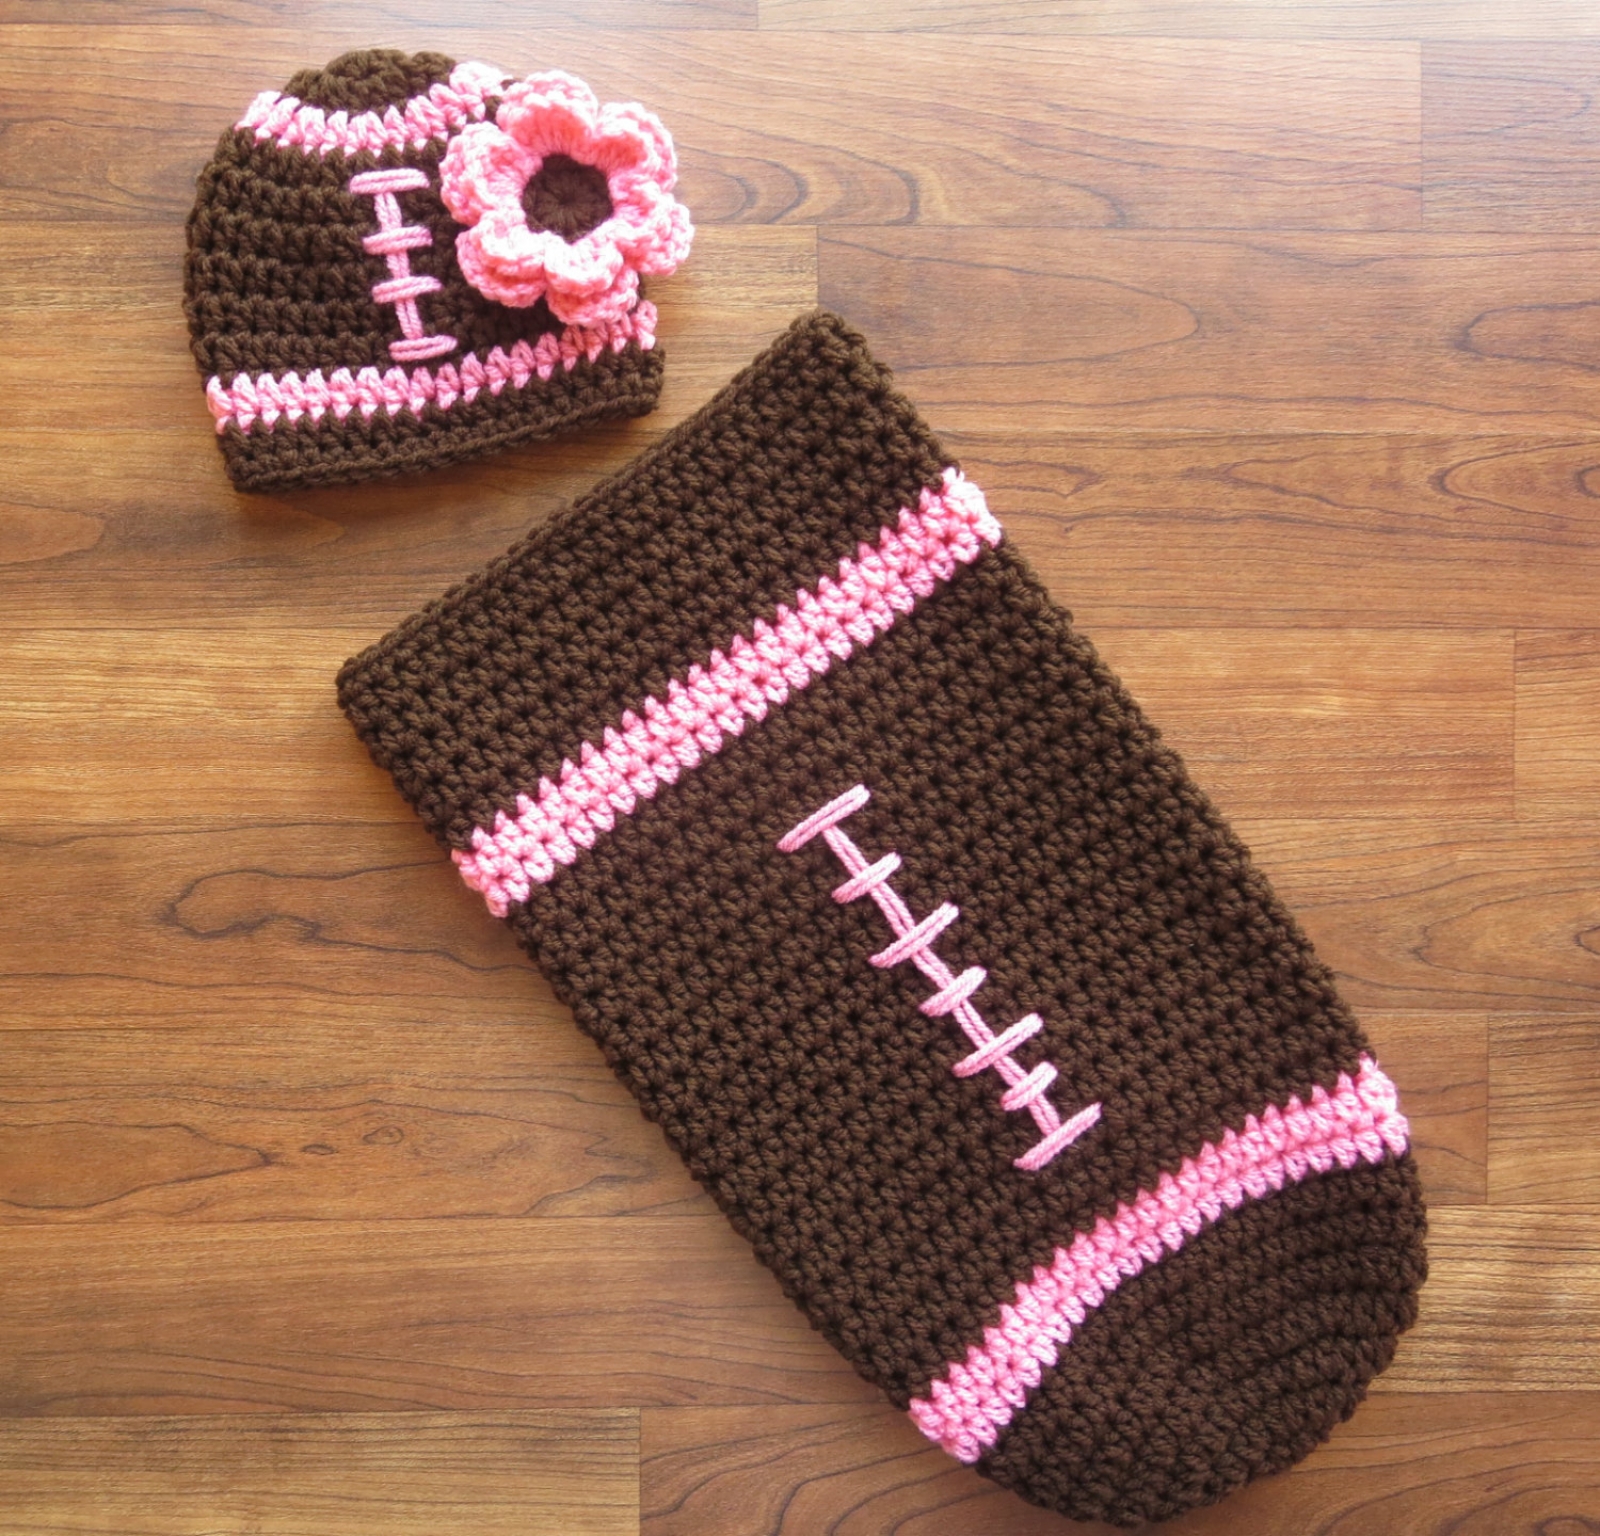 Crocheted Baby Girl Football Cocoon & Hat with Flower - Chocolate ...